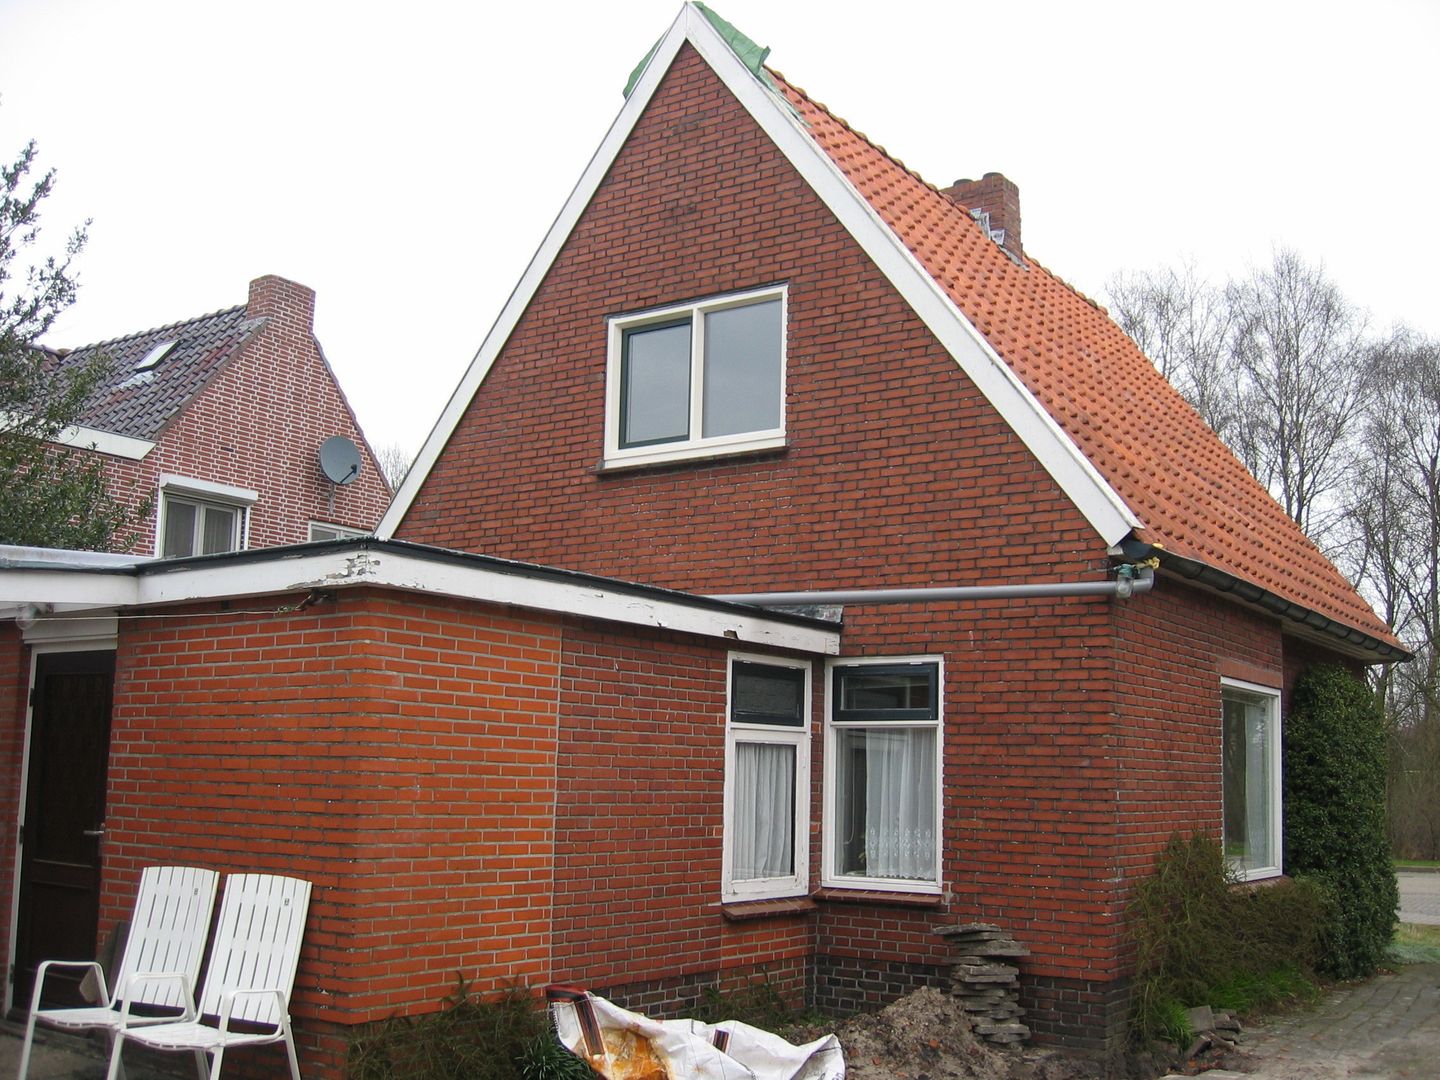 Oude situatie TTAB (Tjade Timmer Architect & Bouwadvies)